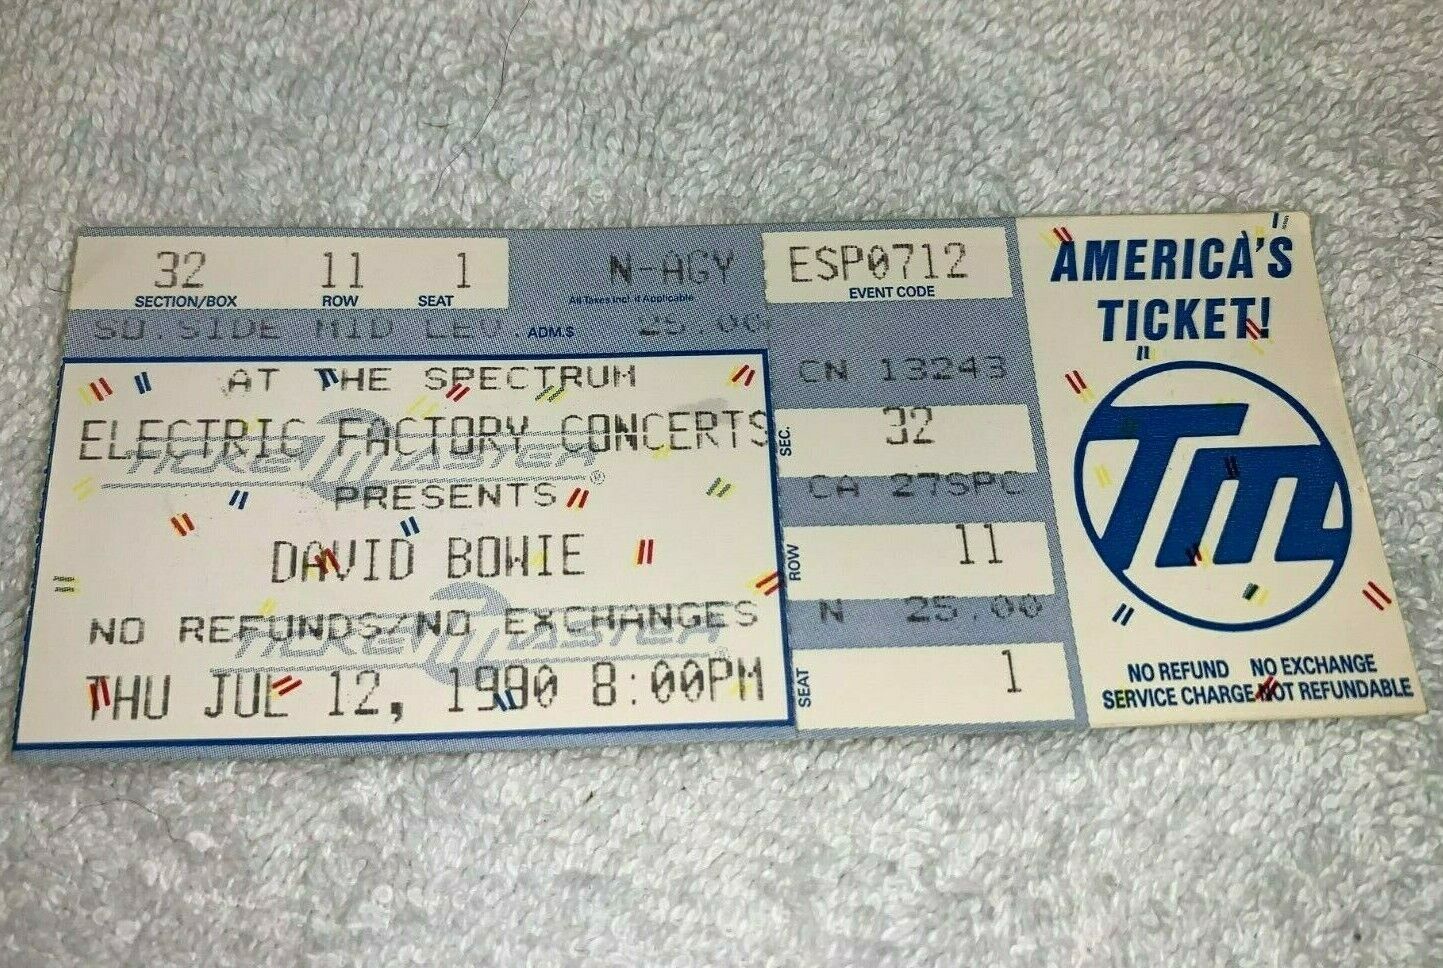 Primary image for DAVID BOWIE 1990 TOUR ORIGINAL CONCERT TICKET STUB THE SPECTRUM IN PHILLY USA